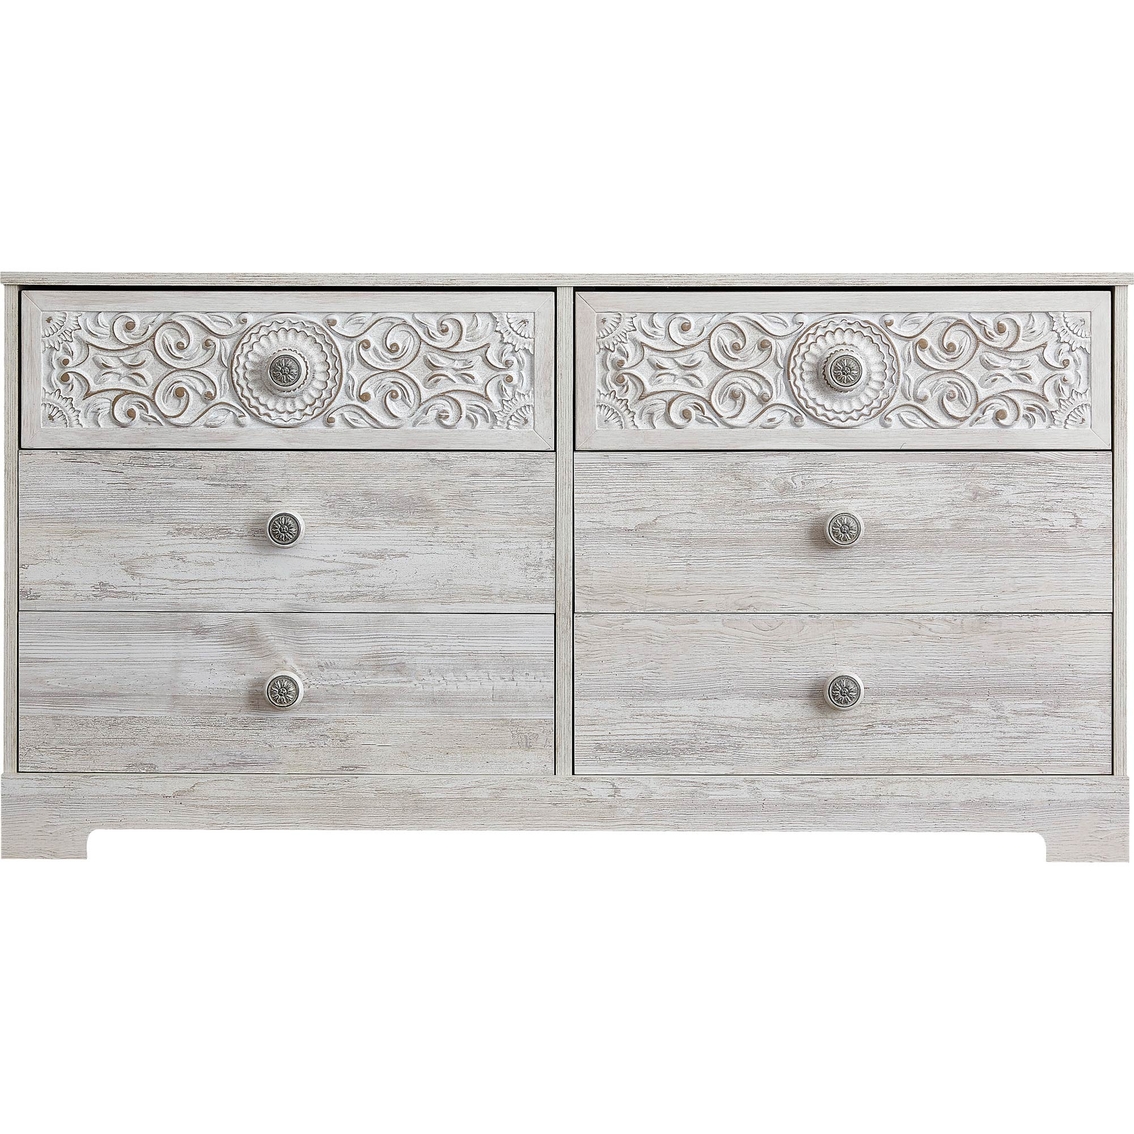 Signature Design by Ashley Paxberry Dresser - Image 3 of 7